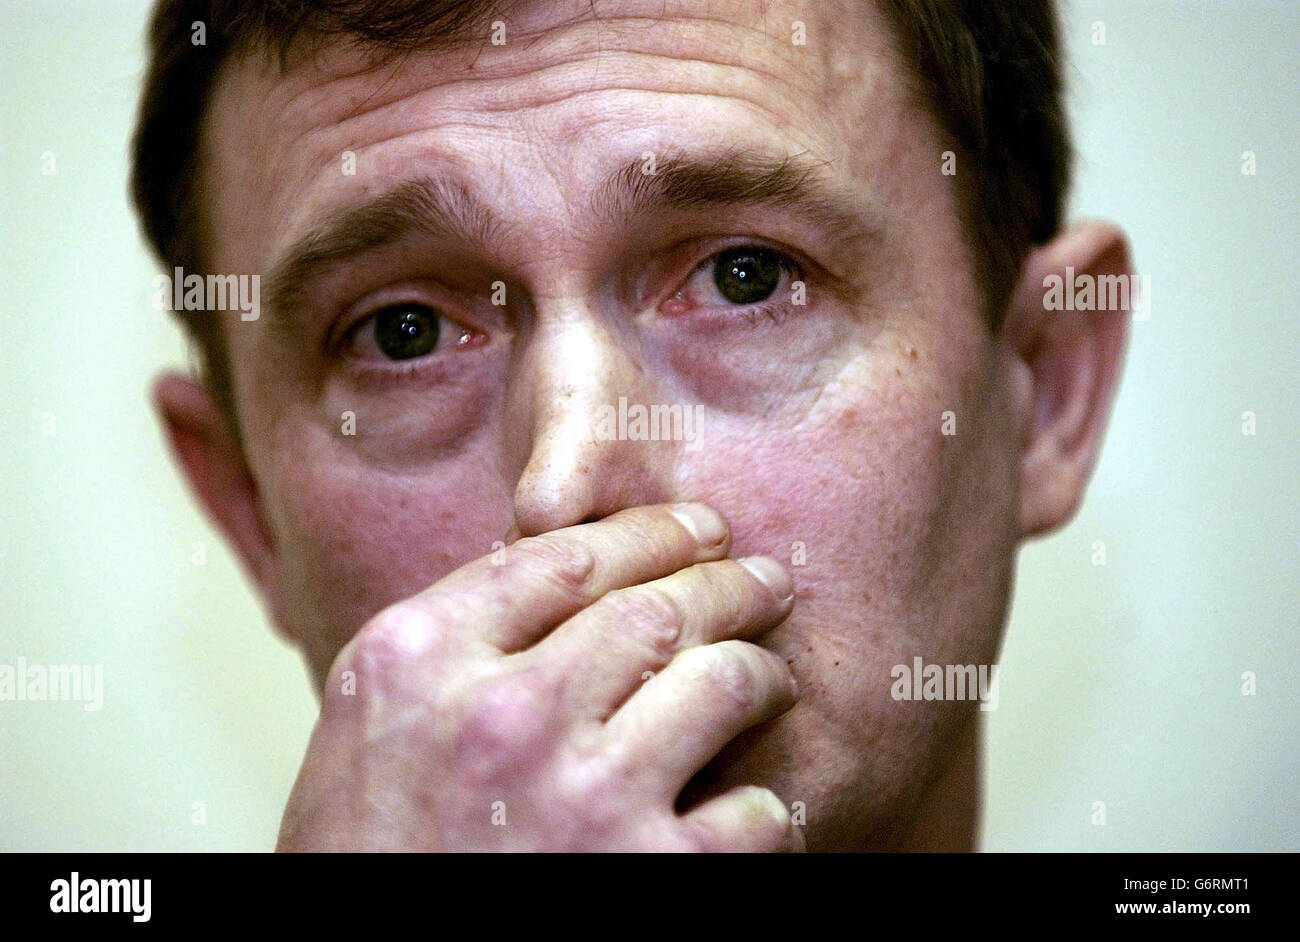 William Sampson, a former captive of the Saudi Authorities, reflects on his experiences of torture whlist held in a Riyadh prison, at a press conference in central London. Mr Sampson was amongst a number of British expatriates held by the Saudi Authorities after a series of bomb attacks against British nationals in the Saudi capital. Stock Photo